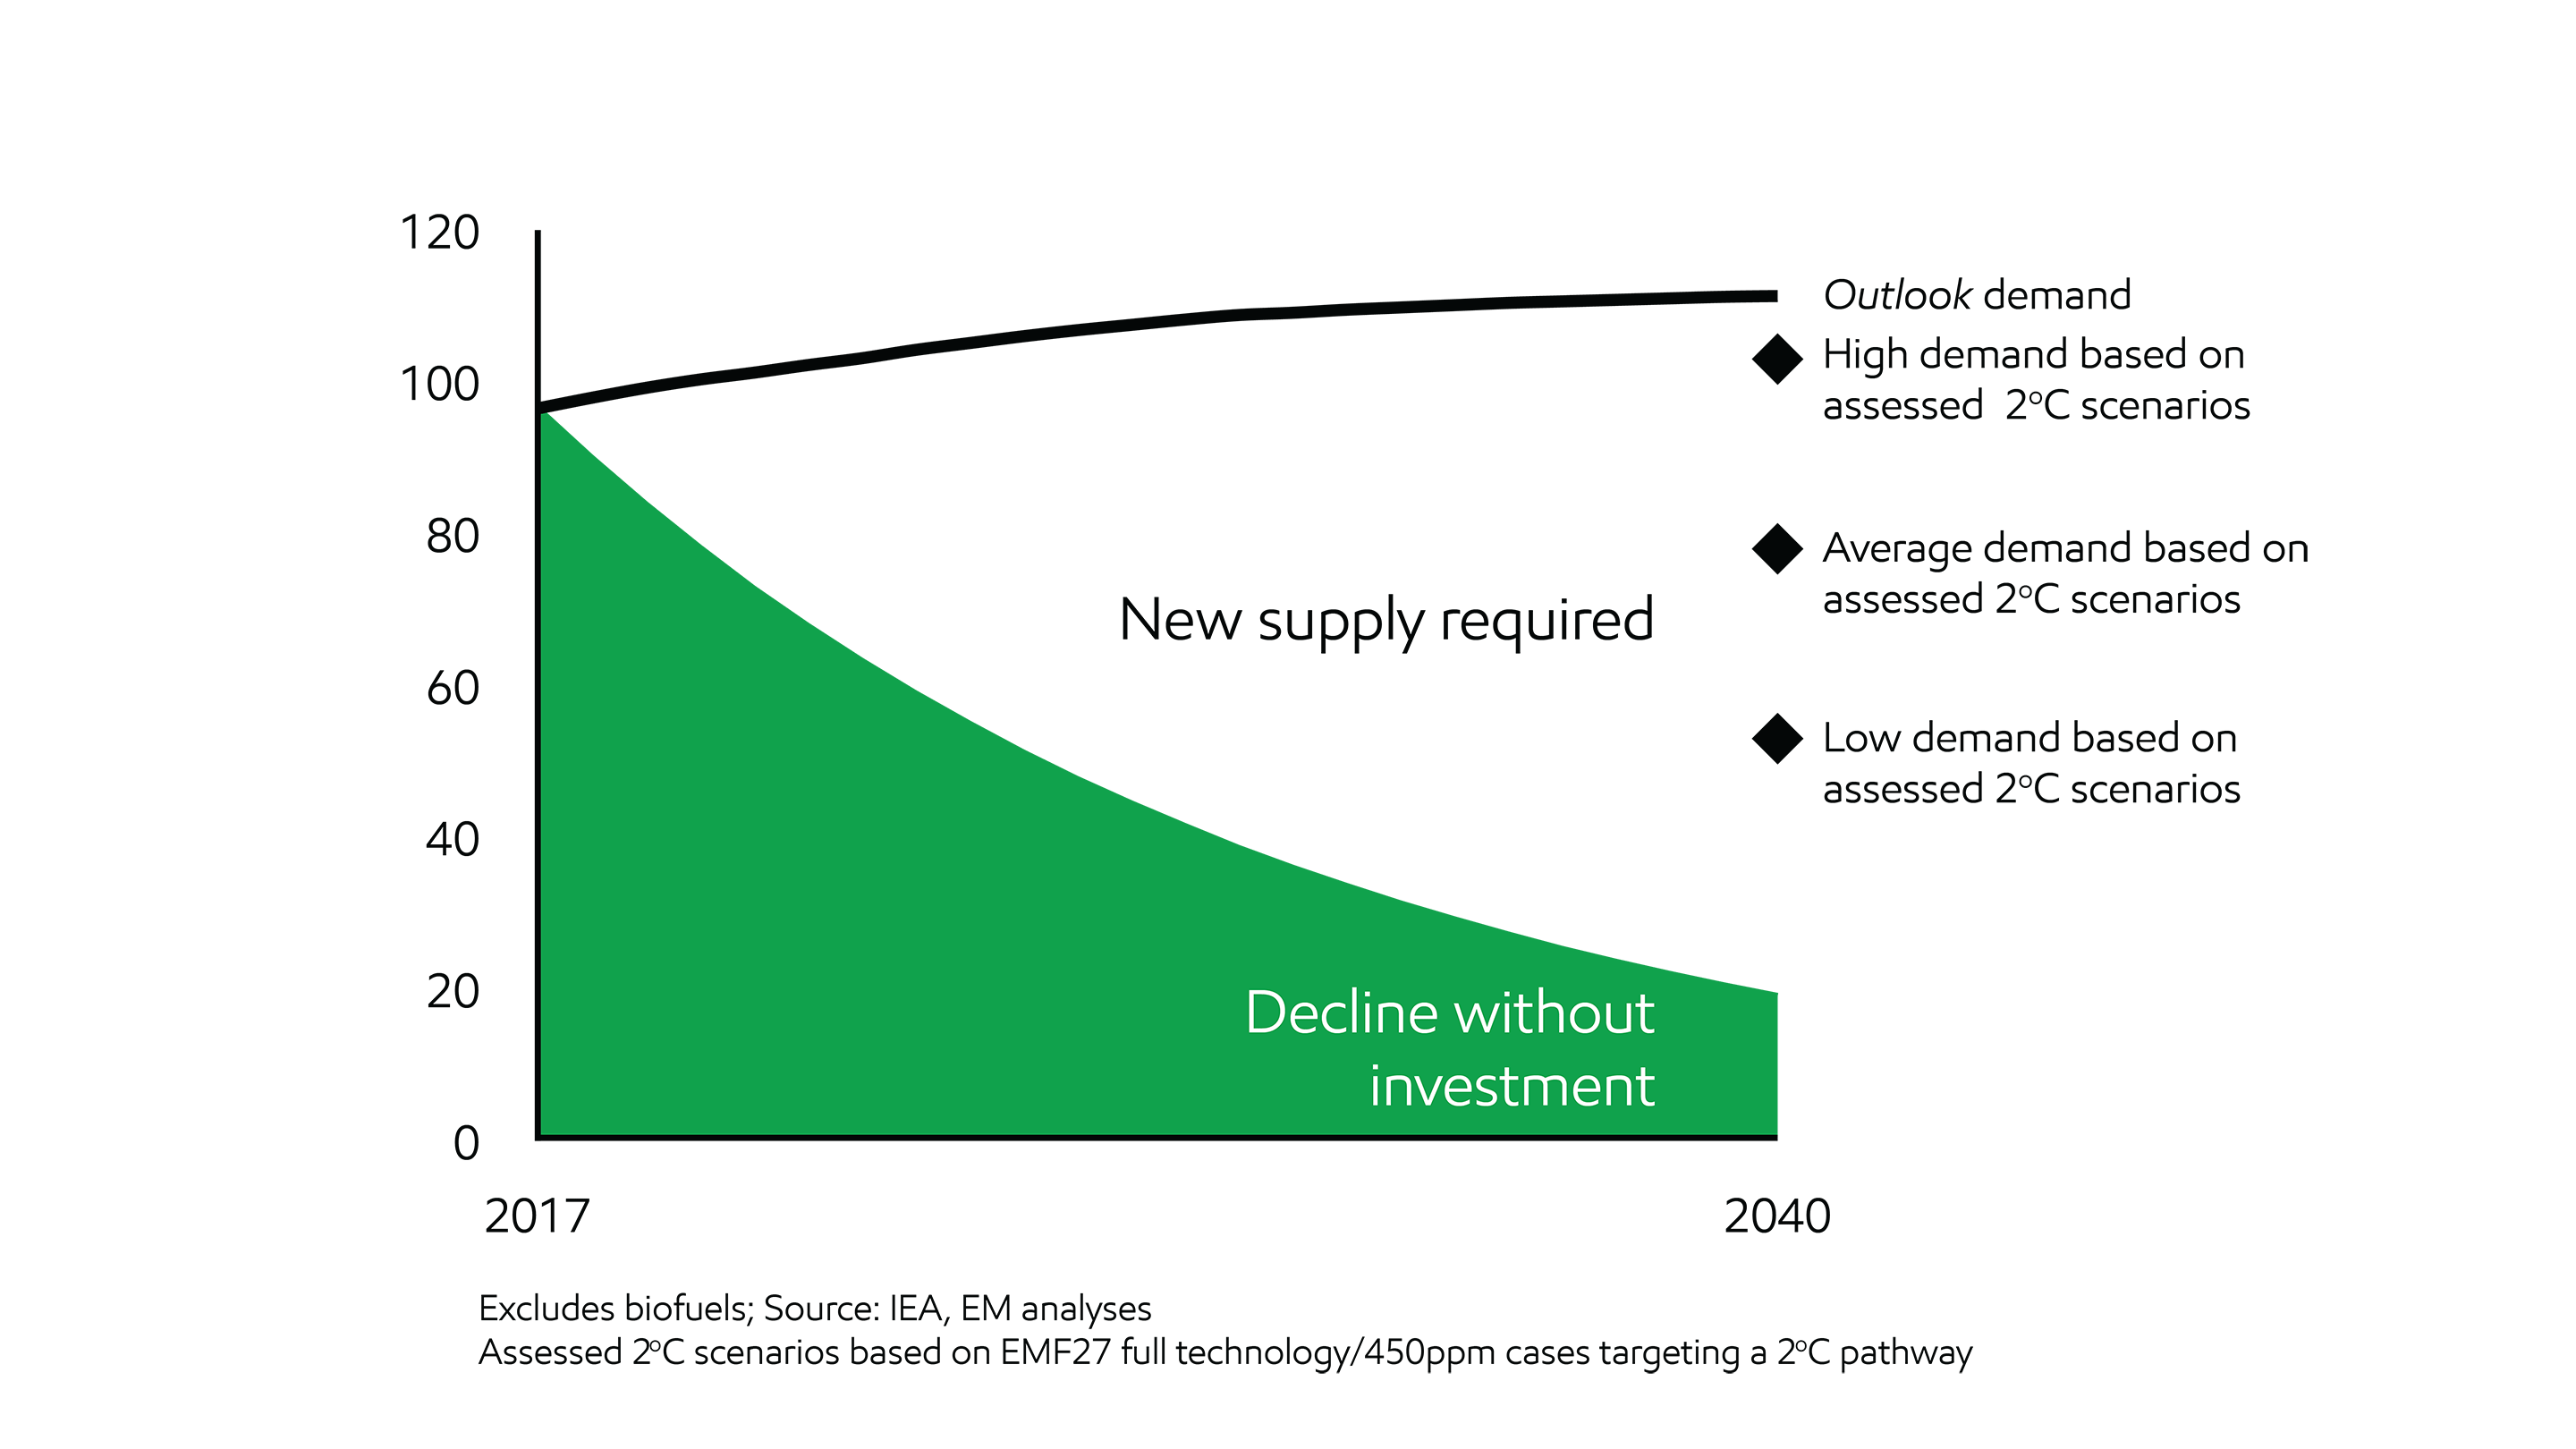 Image Oil demand and supply warrant investment